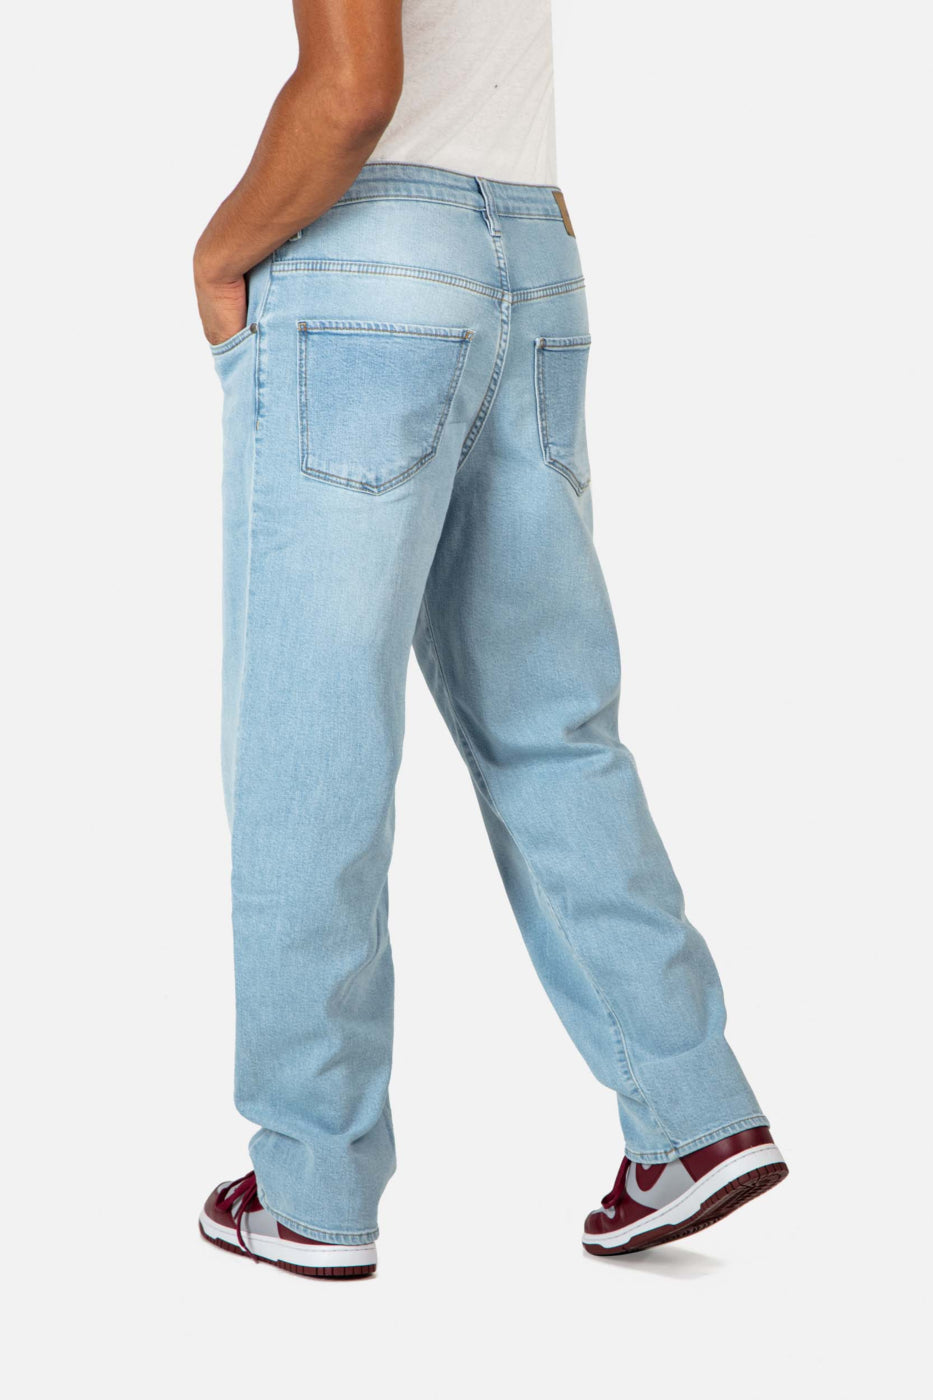 Jeans Reell Solid Retro Light Blue Stone